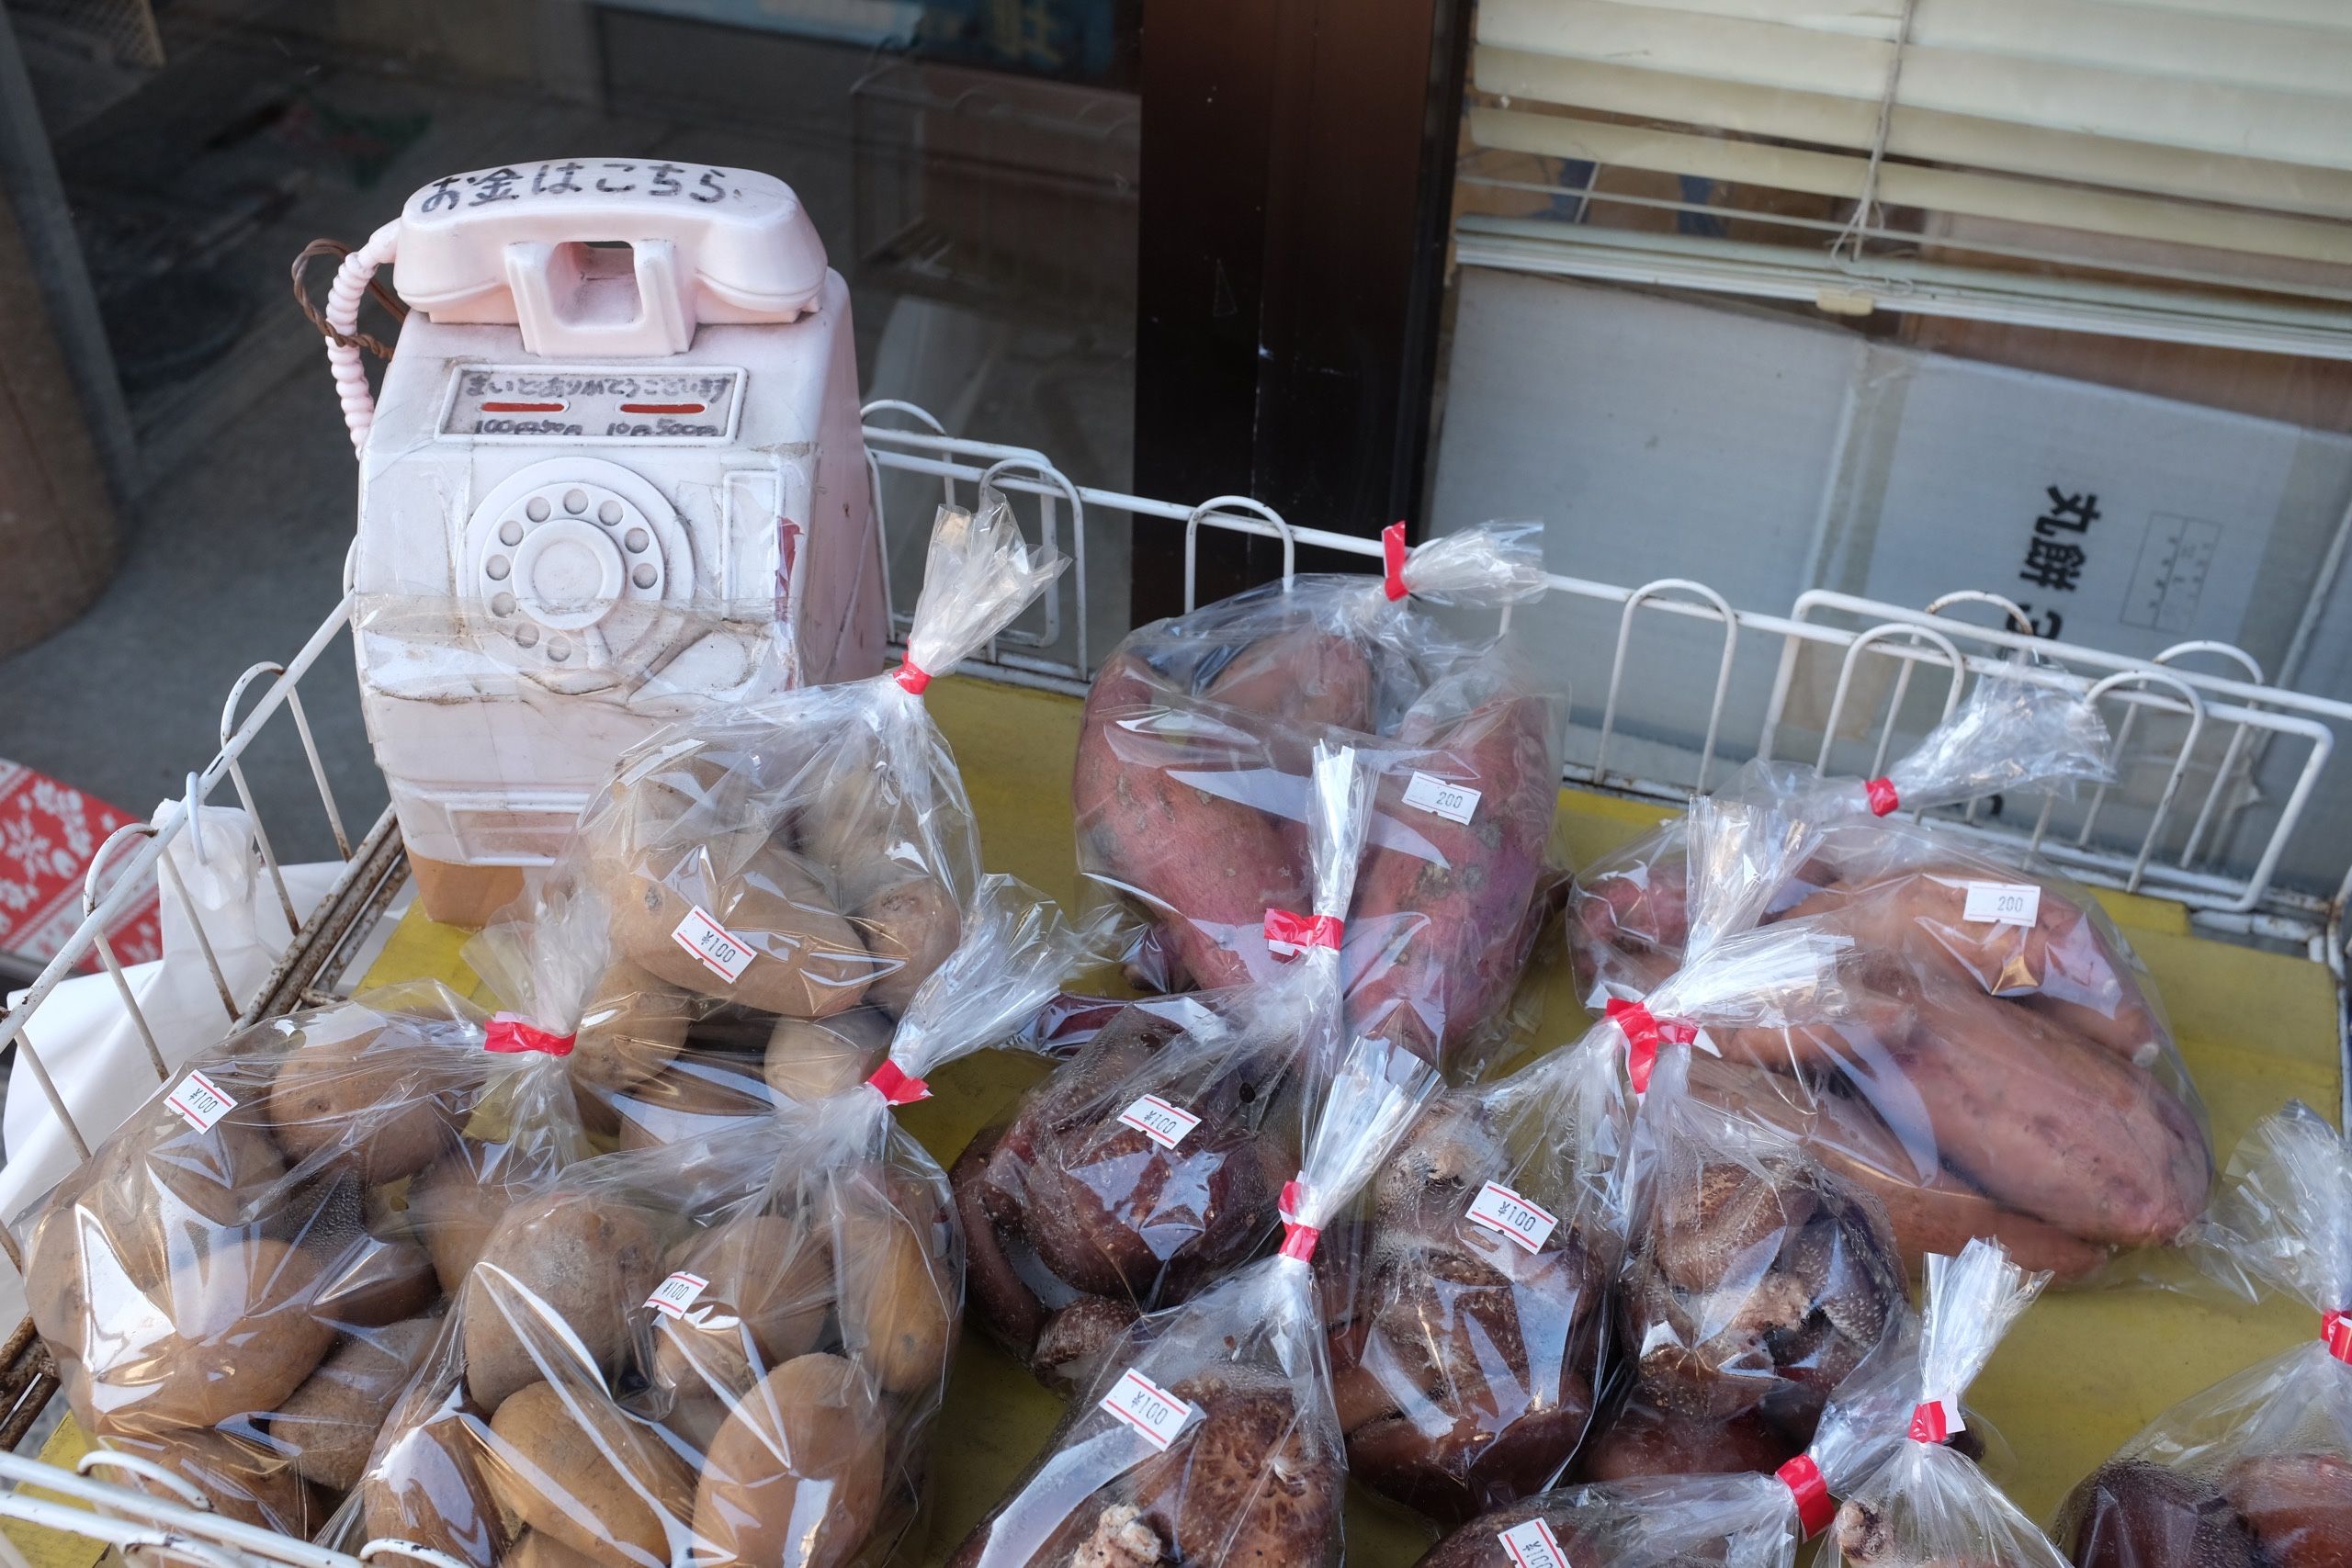 Plastic bags of sweet potatoes for sale with a hollow plastic telephone to drop the money into.